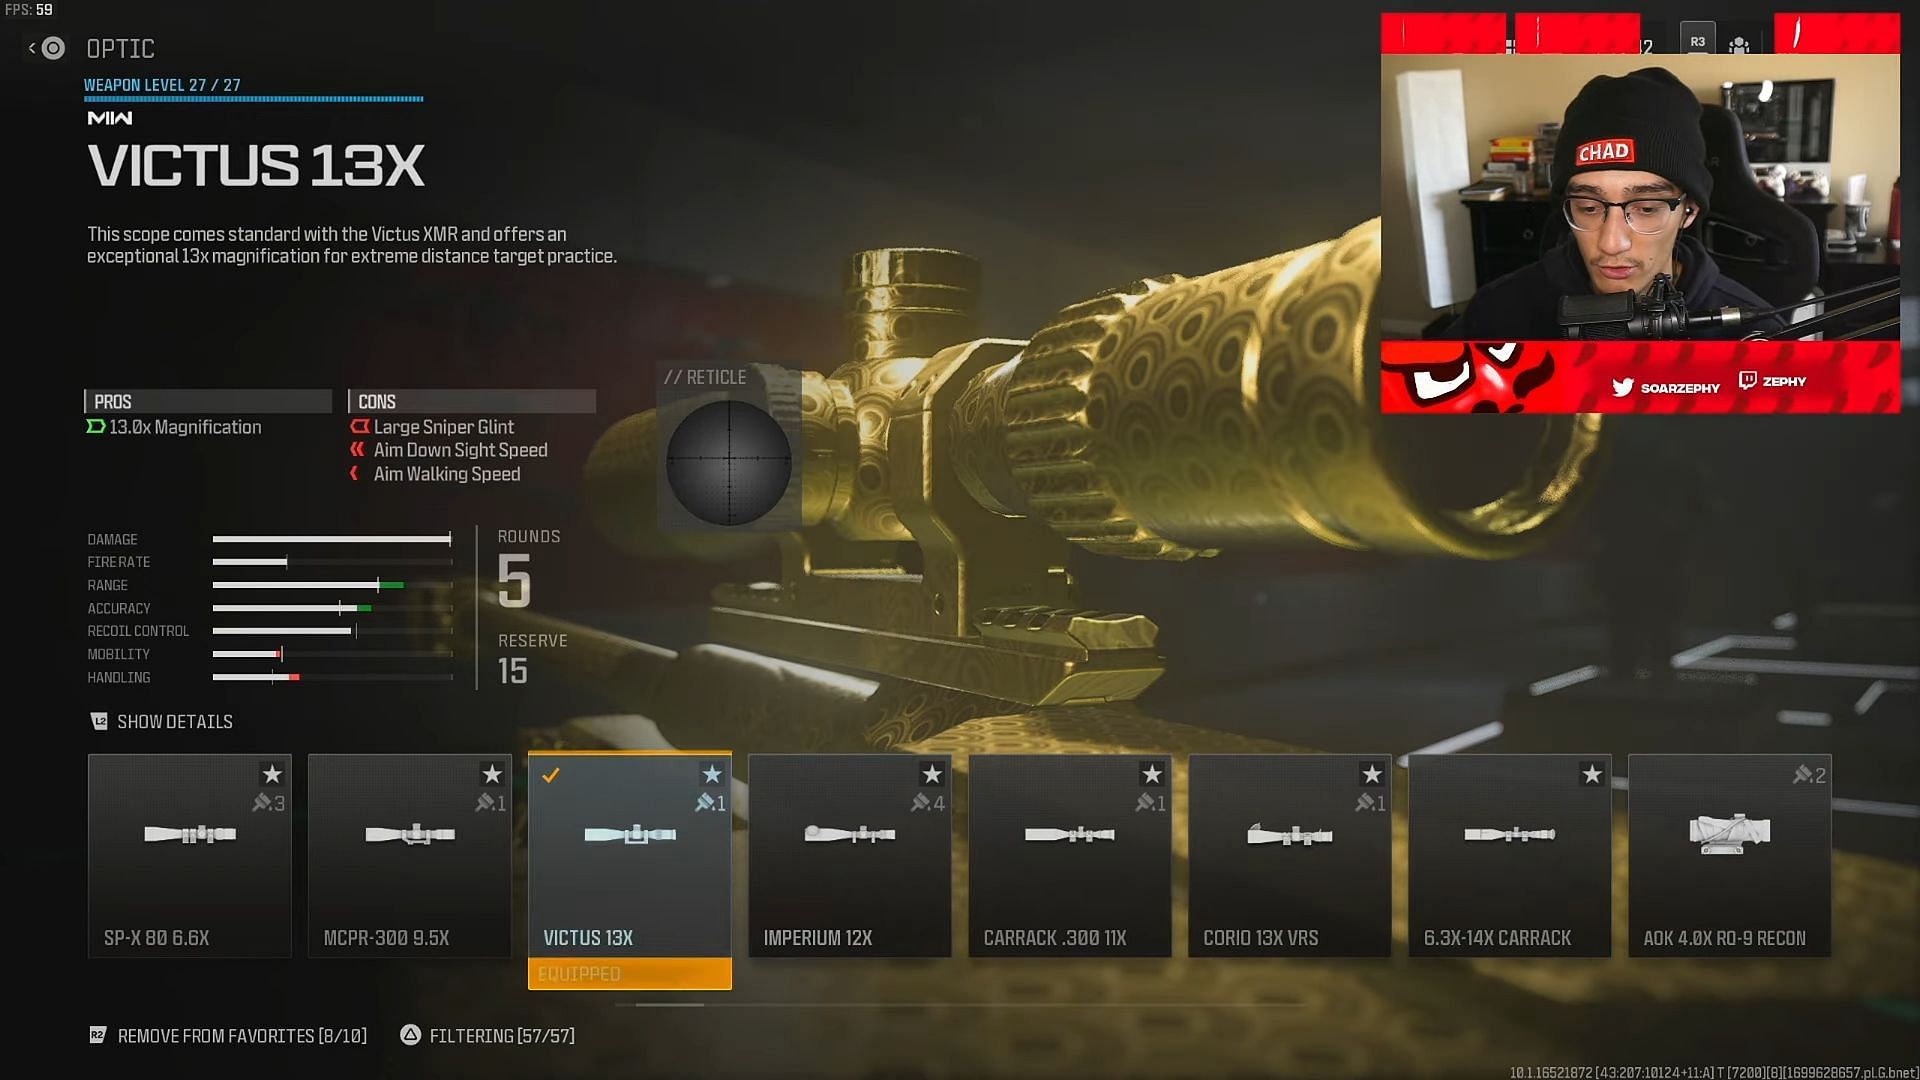 KATT-AMR loadout in MW3 (Image via Activision and youtube.com/@ZEPHY)